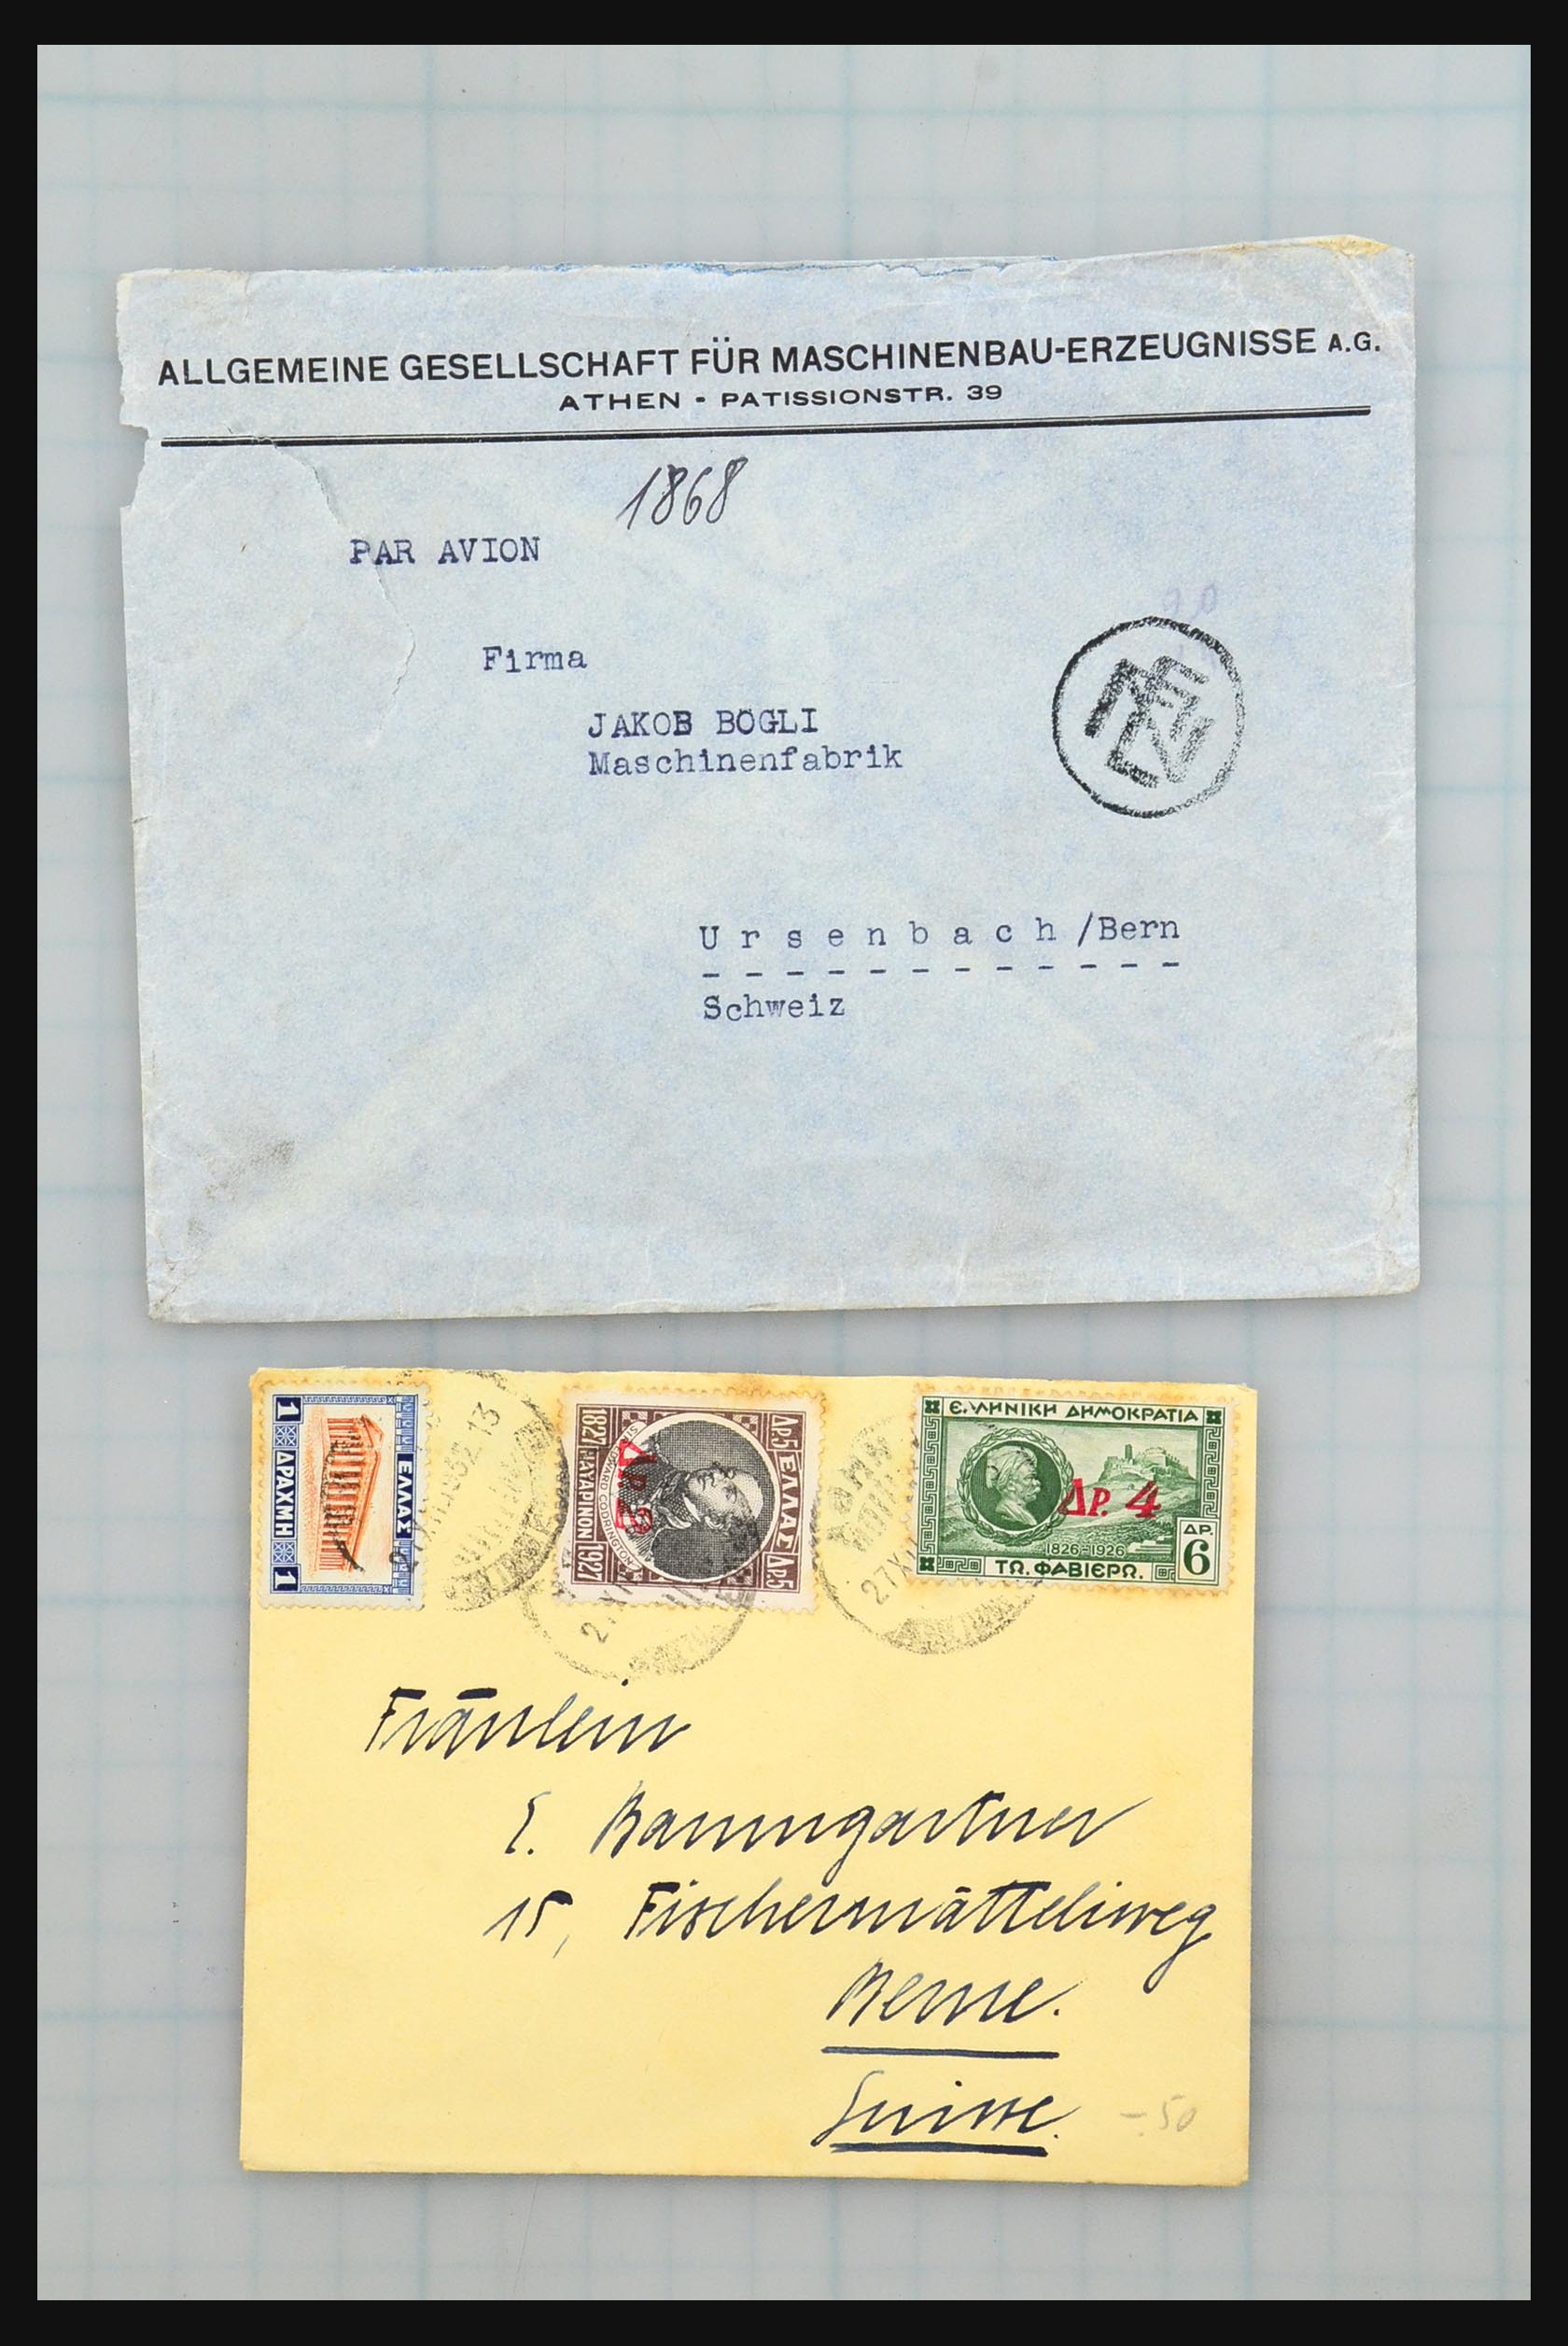 31358 014 - 31358 Portugal/Luxemburg/Greece covers 1880-1960.